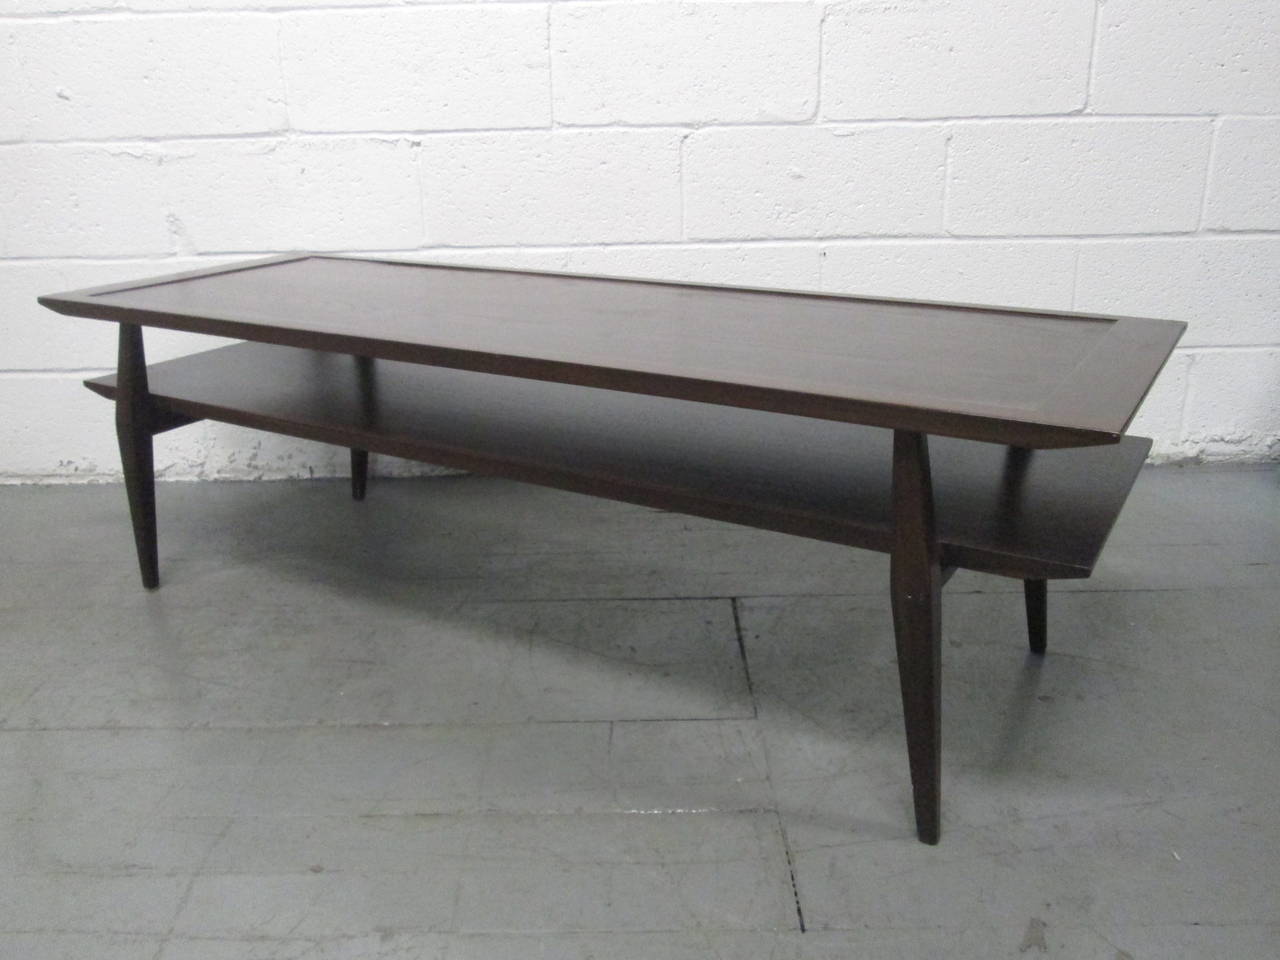 Two tier coffee table by Bertha Schaefer for Singer & Sons.